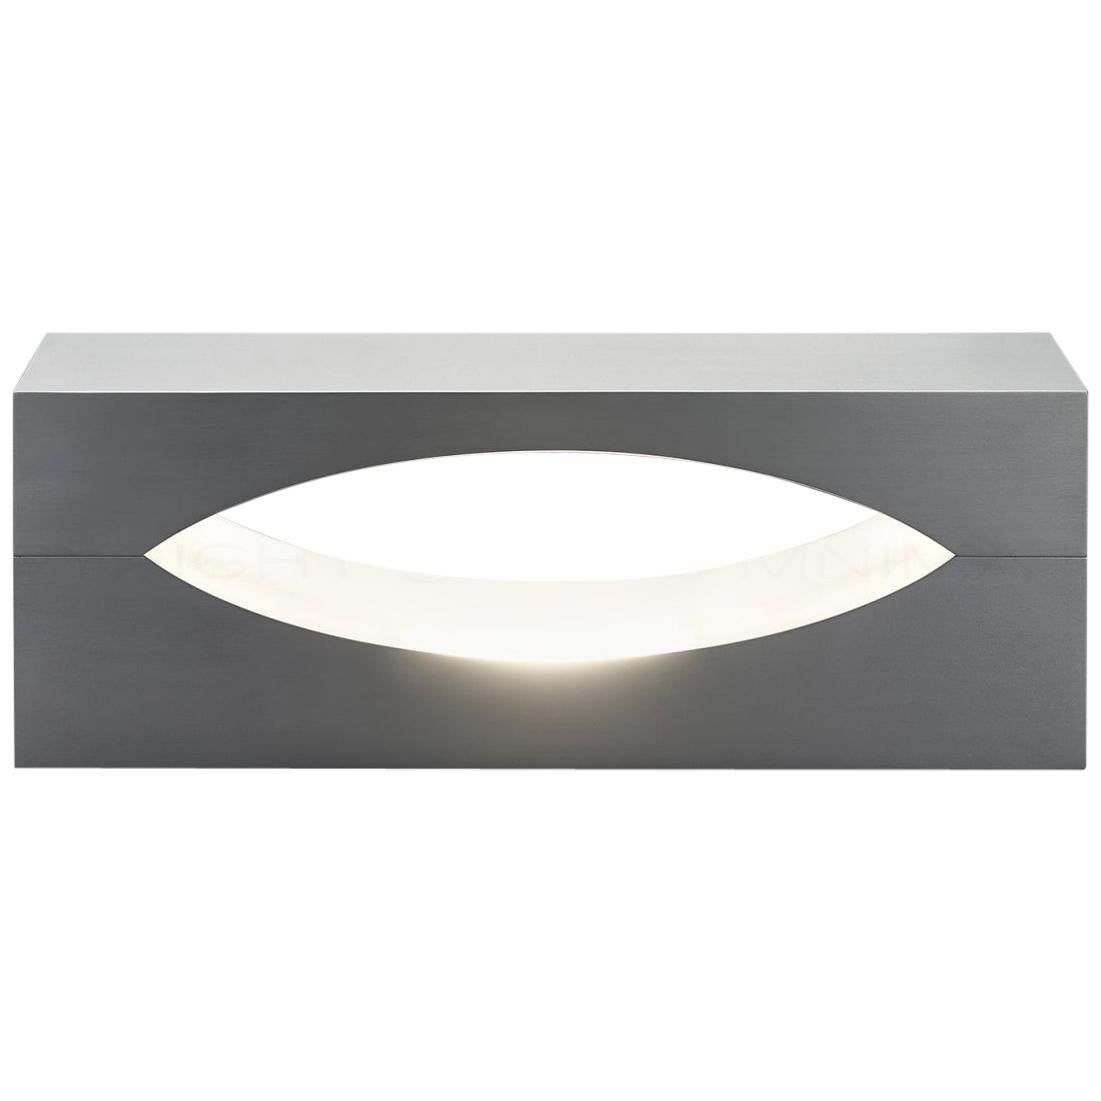 Snakke by Mnima, Table Light Sculpted from Solid Aluminum, Modern, Minimal